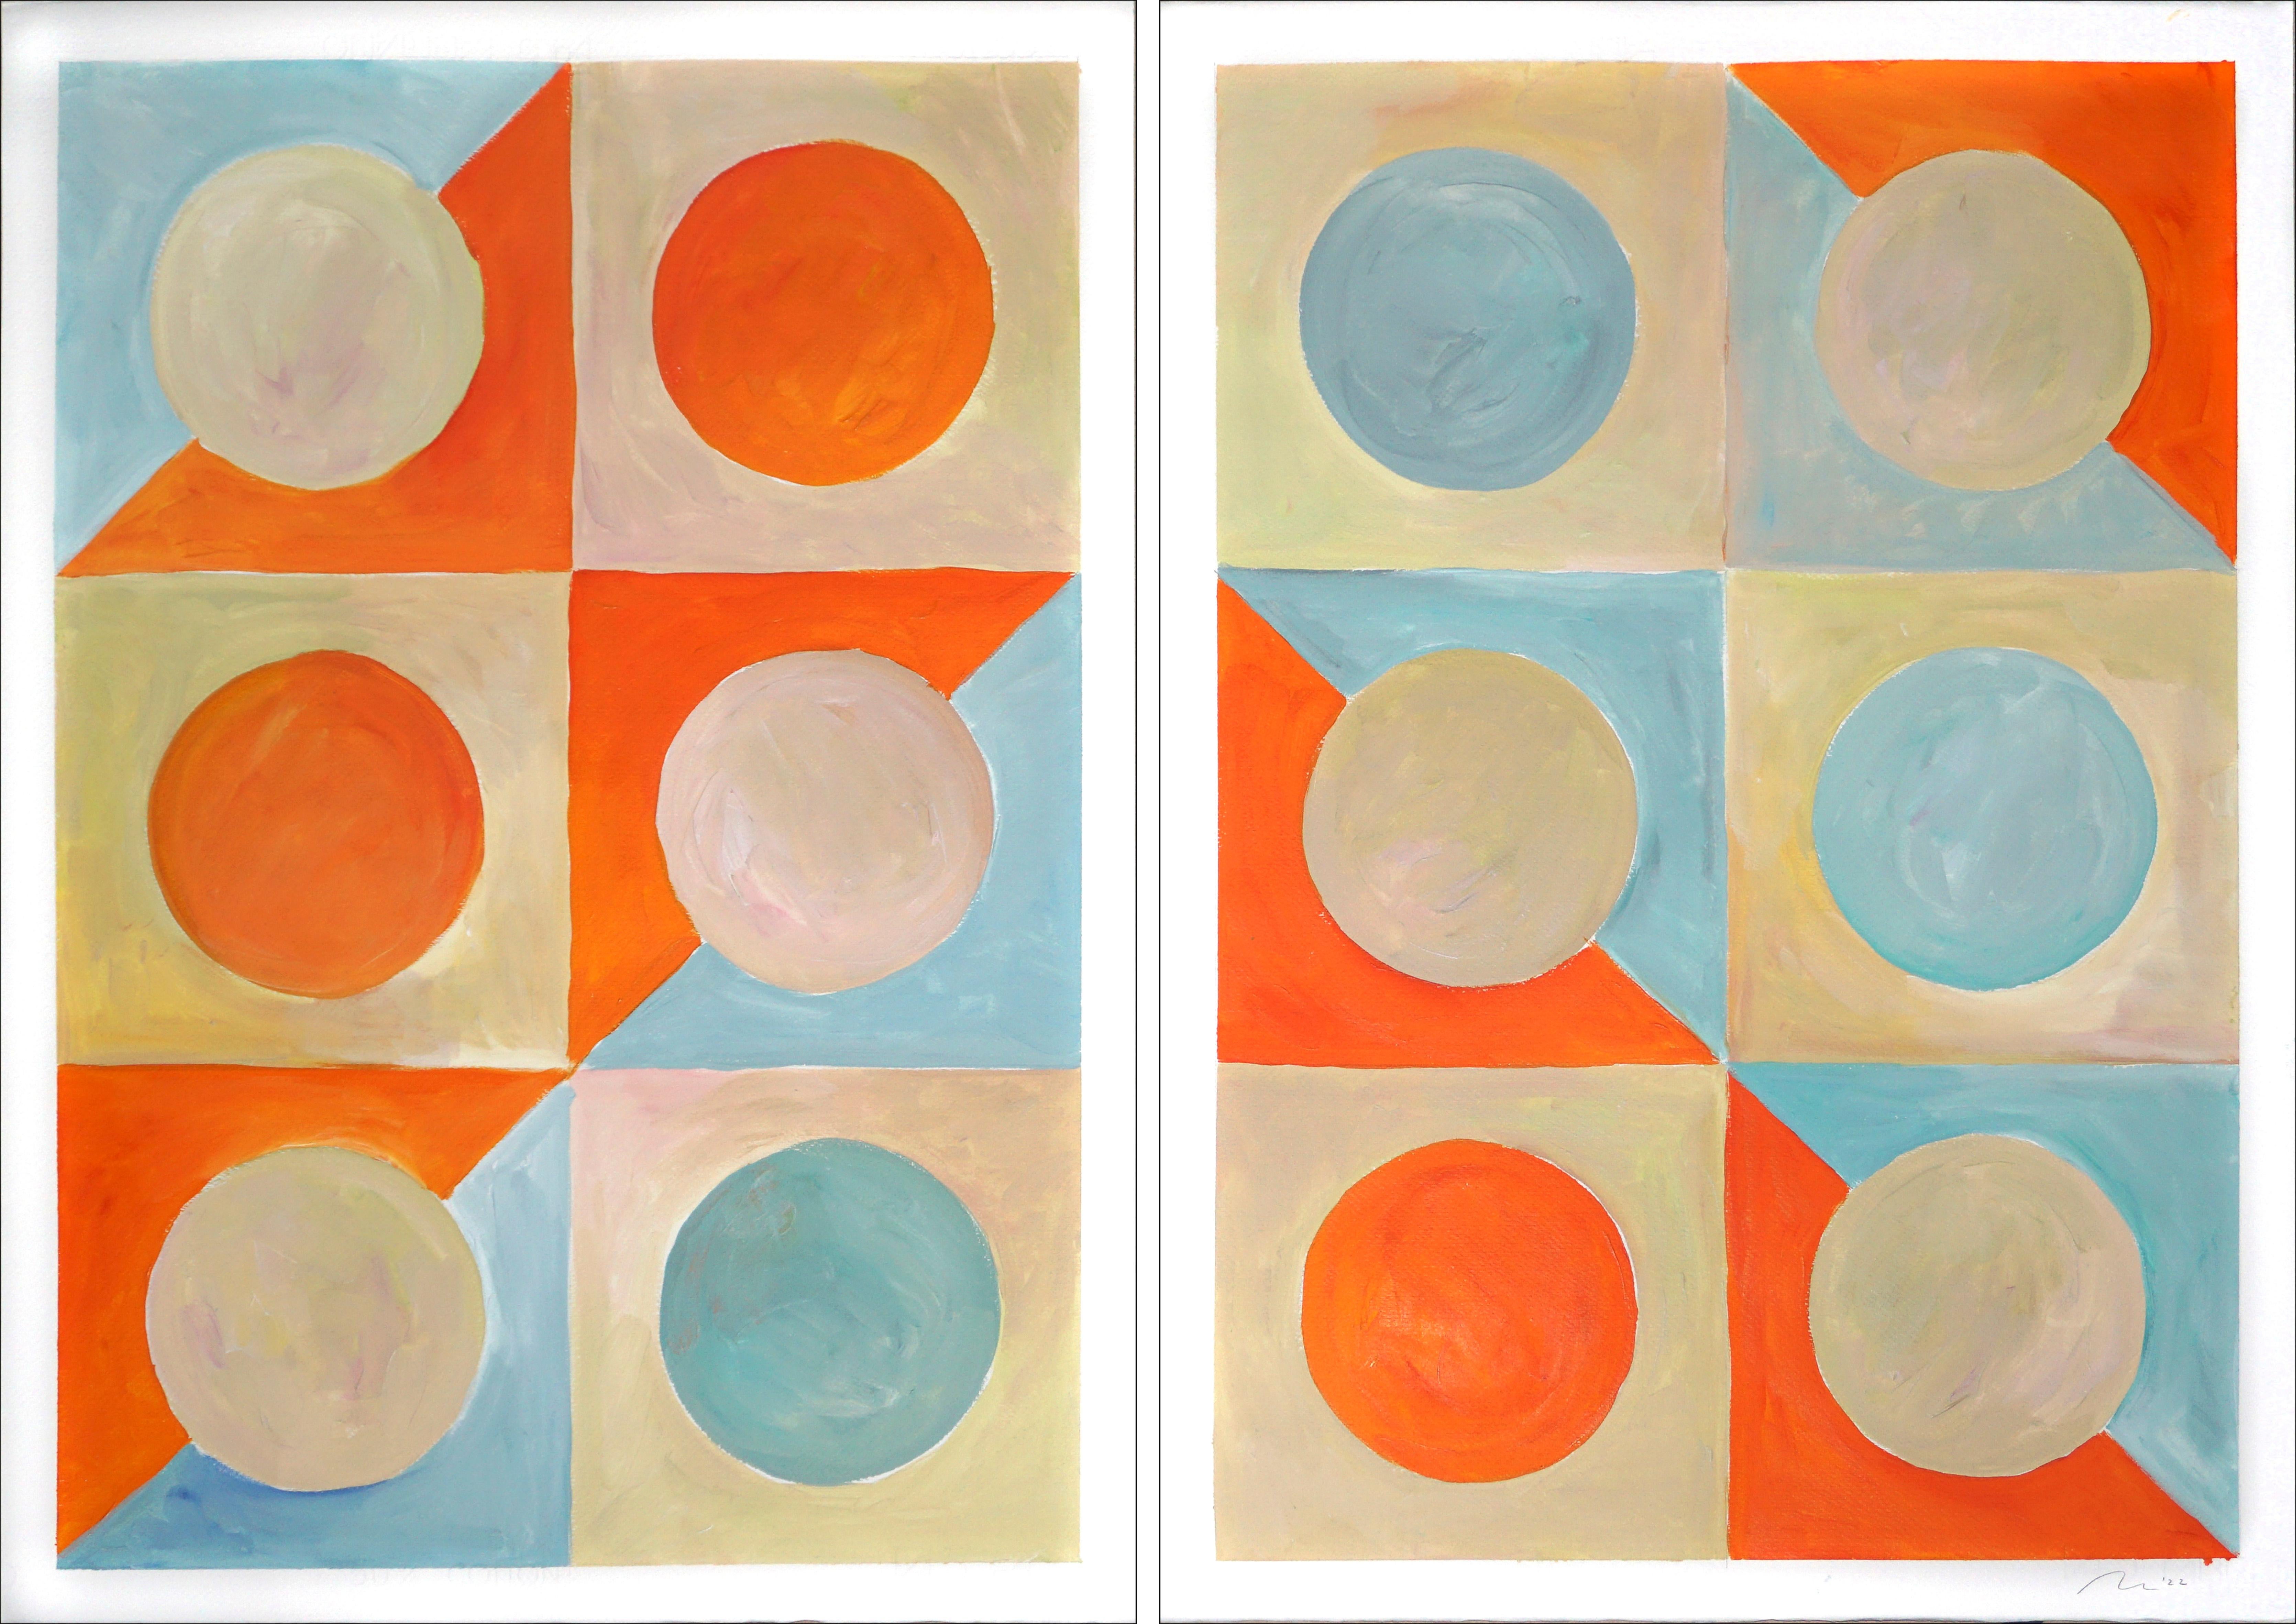 Natalia Roman Abstract Painting - Yin Yang Golden Pattern Tiles, Orange and Turquoise Bauhaus Shapes Diptych, 2022